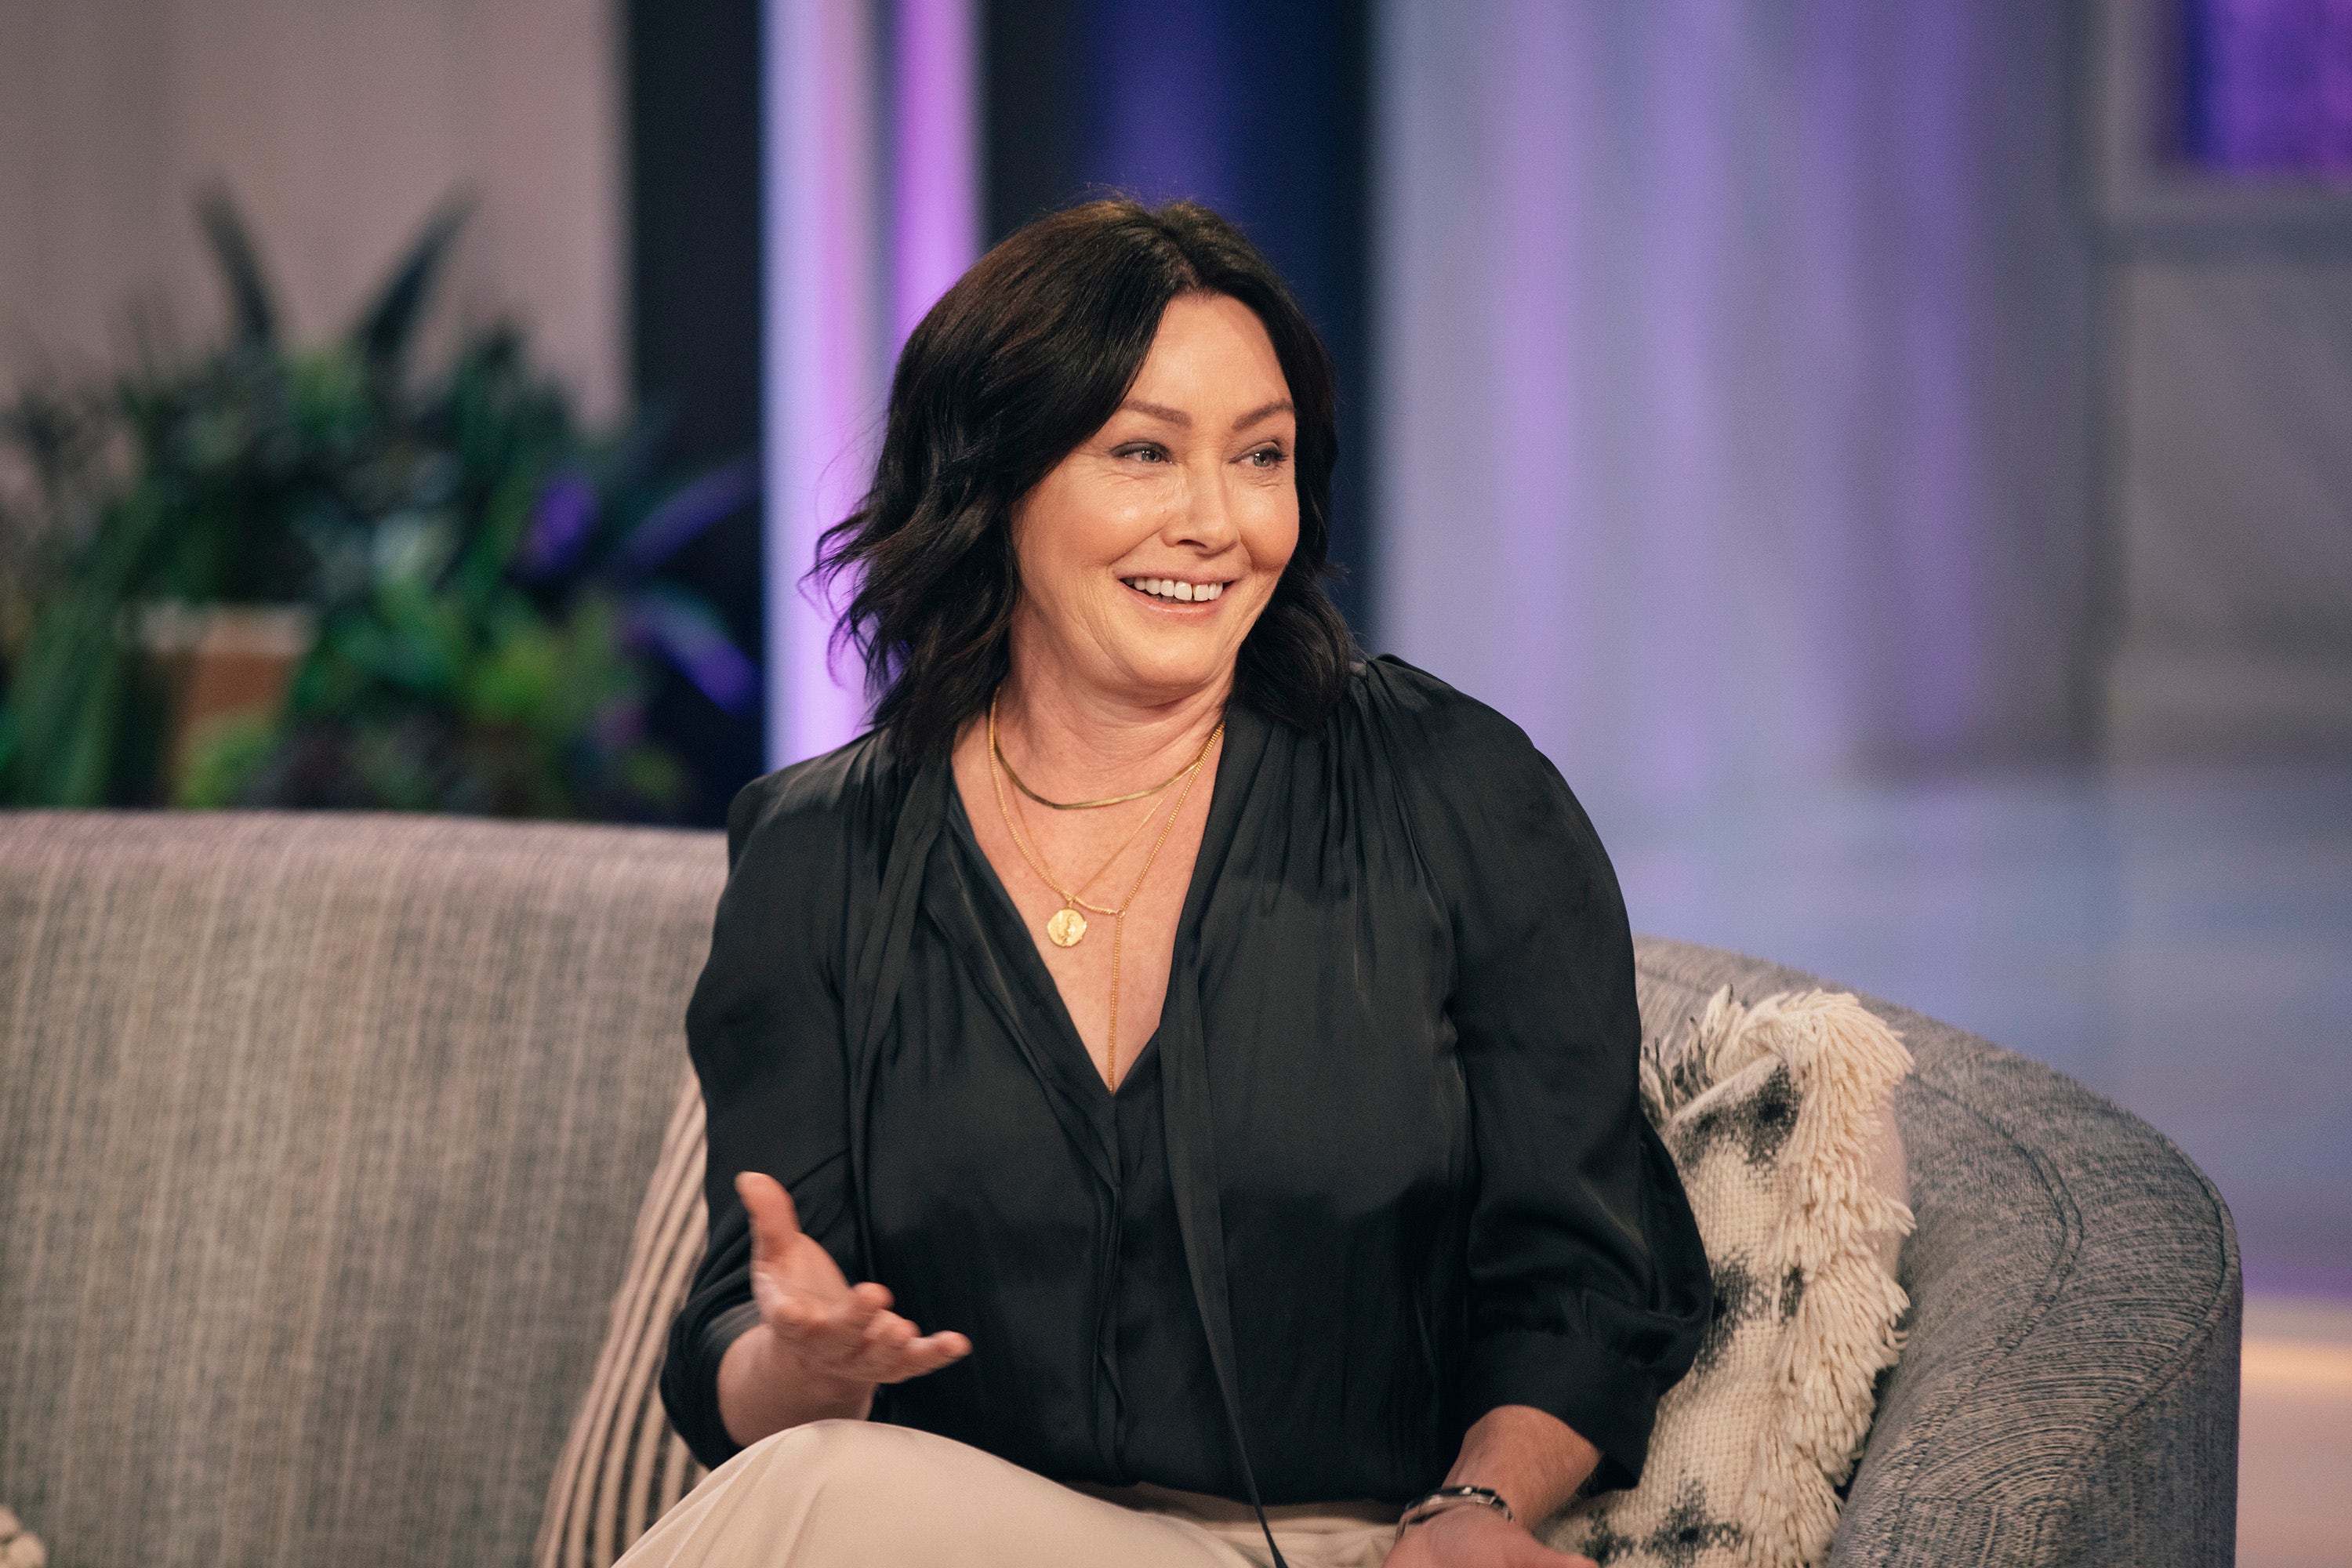 Shannen Doherty shares health update after ‘turbulent year’ struggling with cancer: 'Thankful' to 'be here'